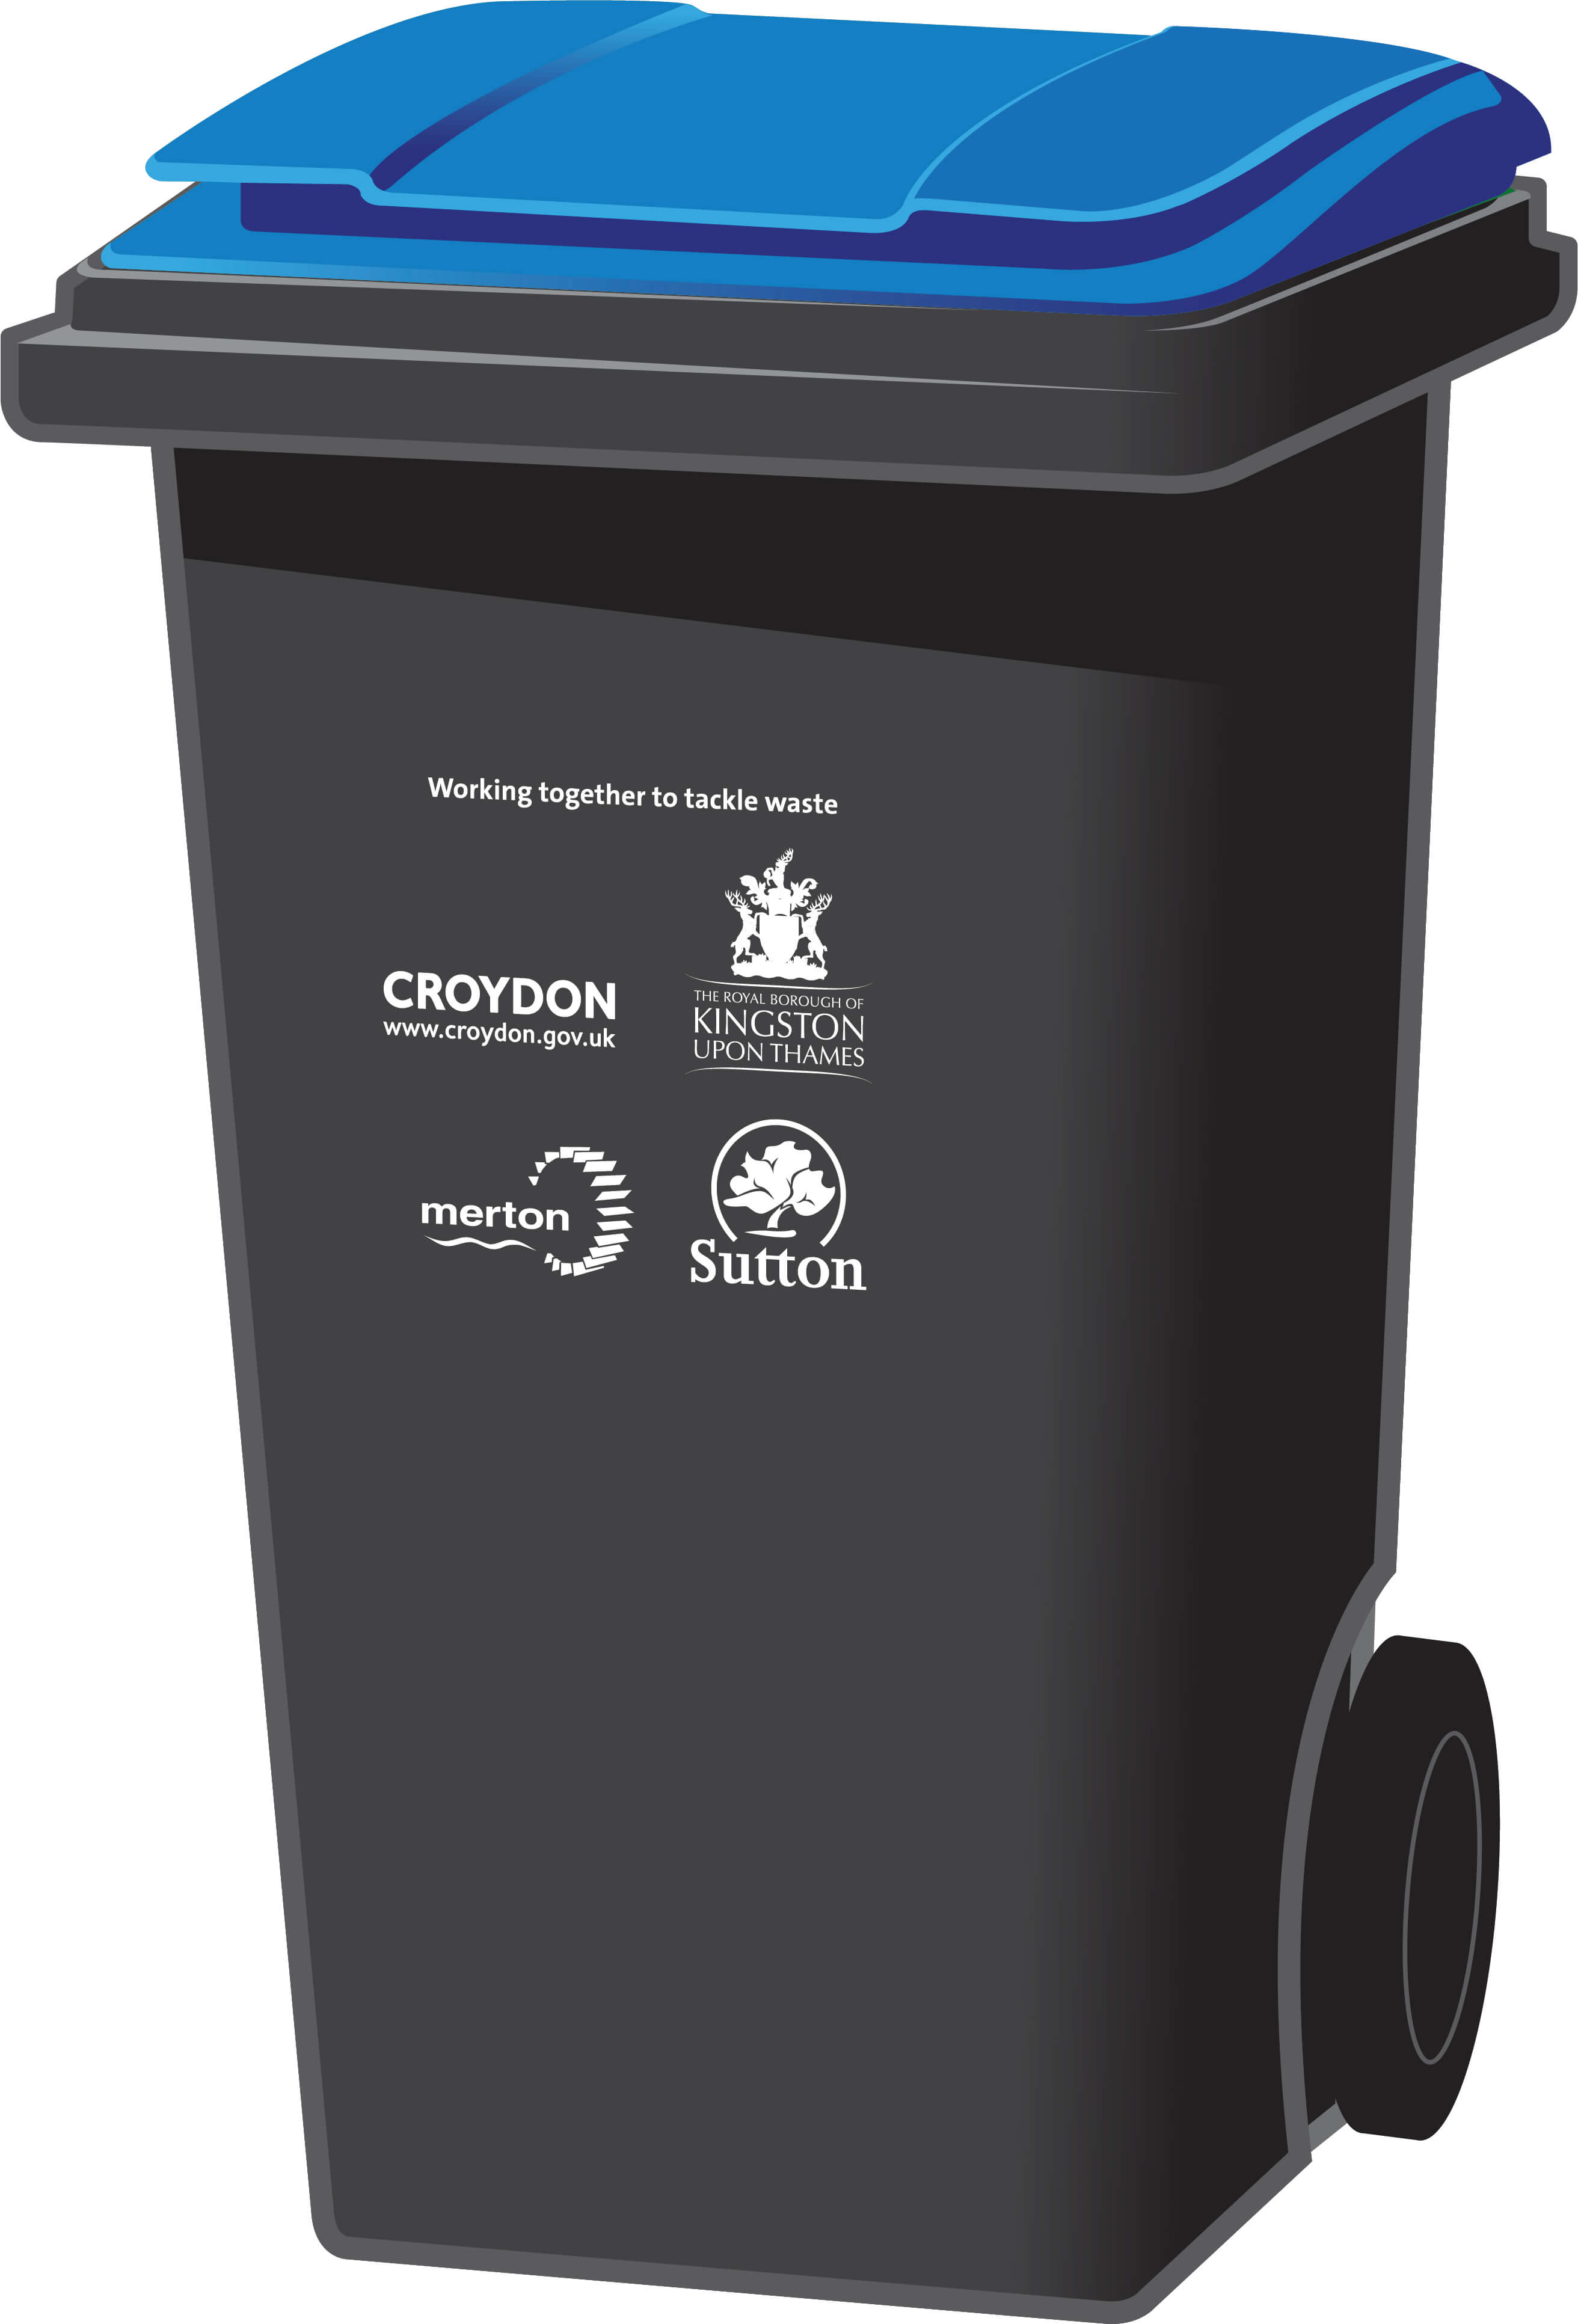 Grey wheelie bin with a blue lid with South London Waste Partnership logos on it.